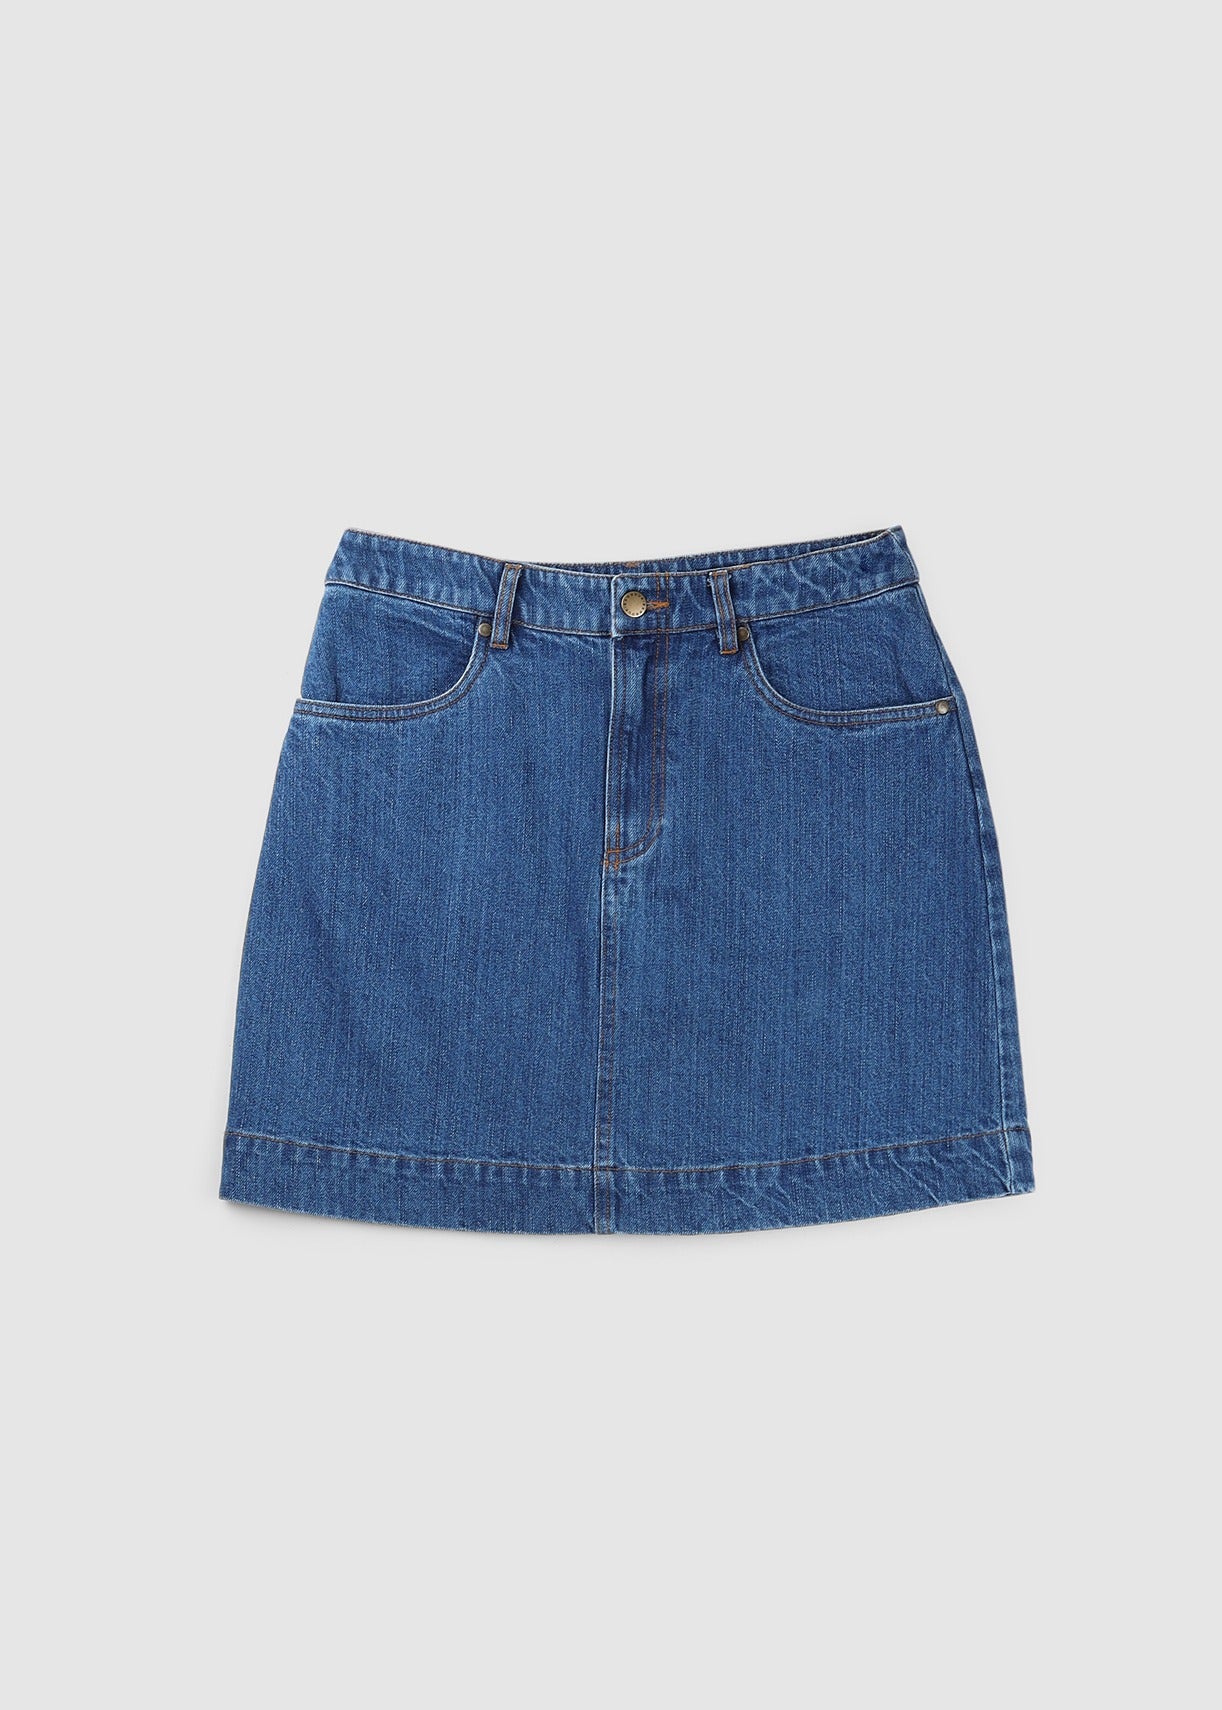 Image of Barbour Womens Thistle Denim Mini Skirt In Authentic Wash